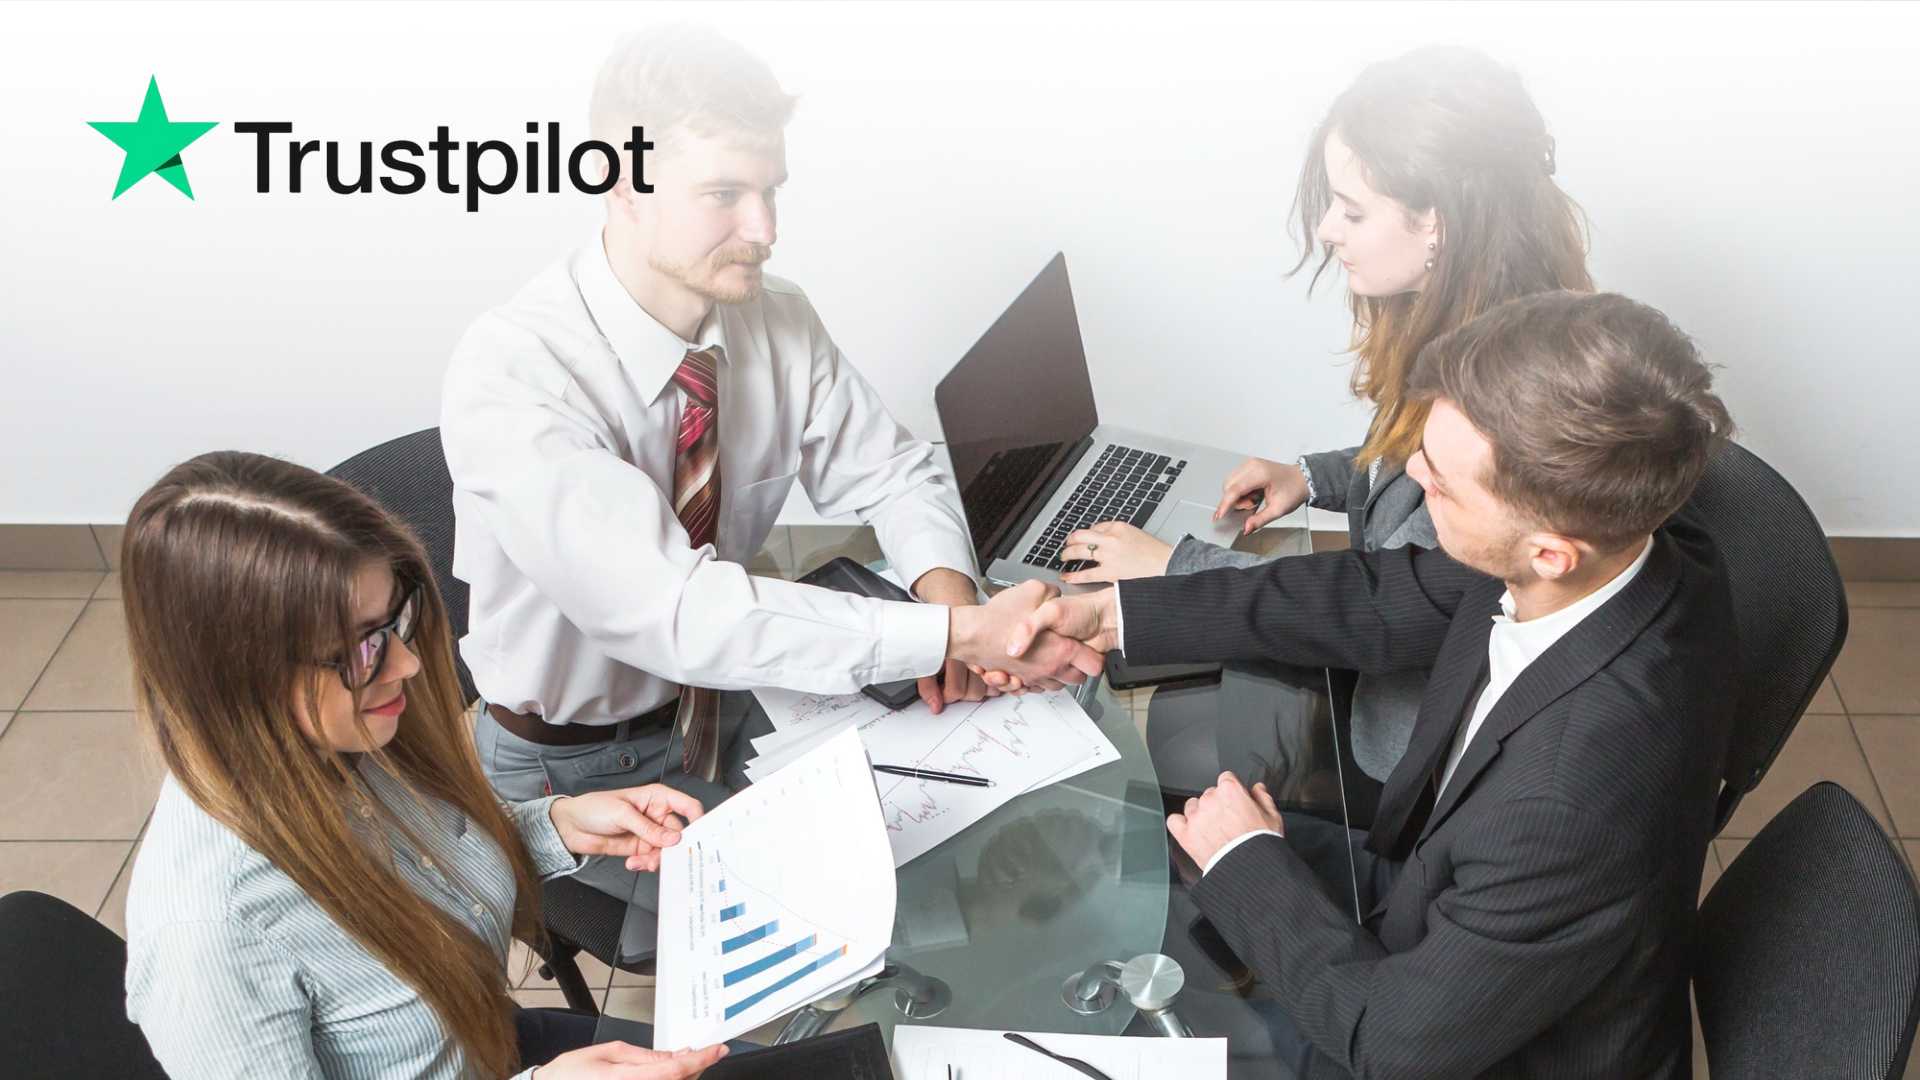 Trustpilot Unveils Enhanced Features Empowering Businesses with Customer Feedback Insights